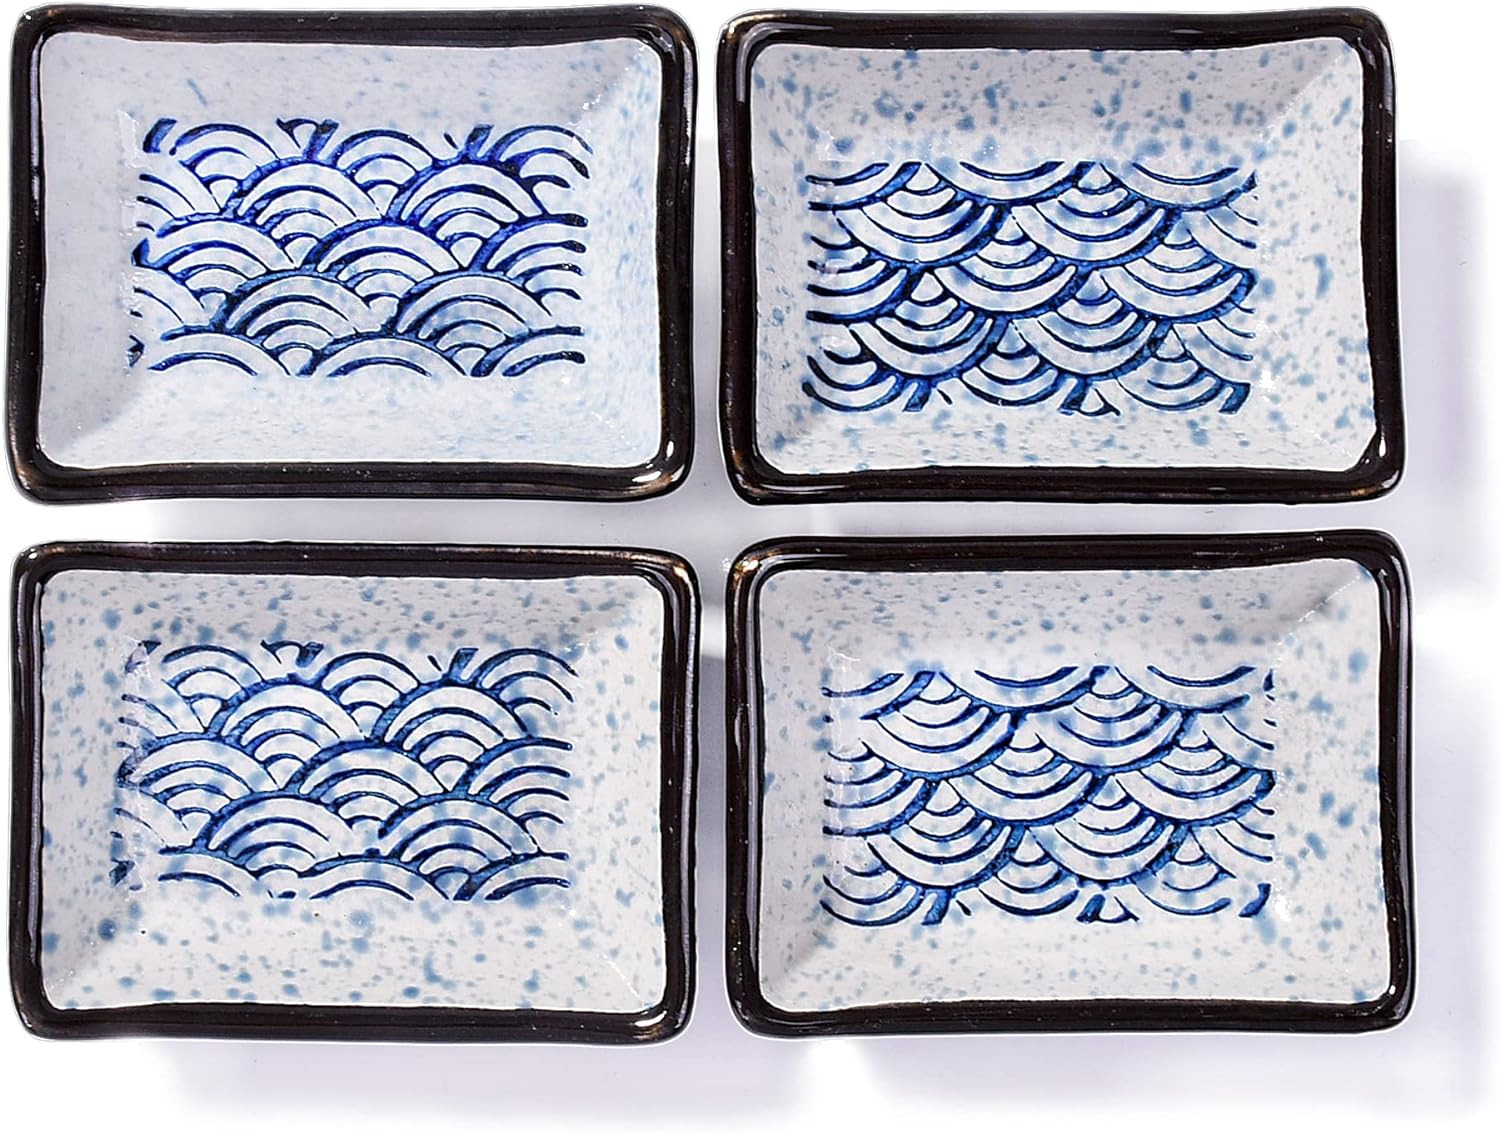 Japanese Soy Dish for Sushi, Soy Sauce Dishes Set of 4, Blue Waves